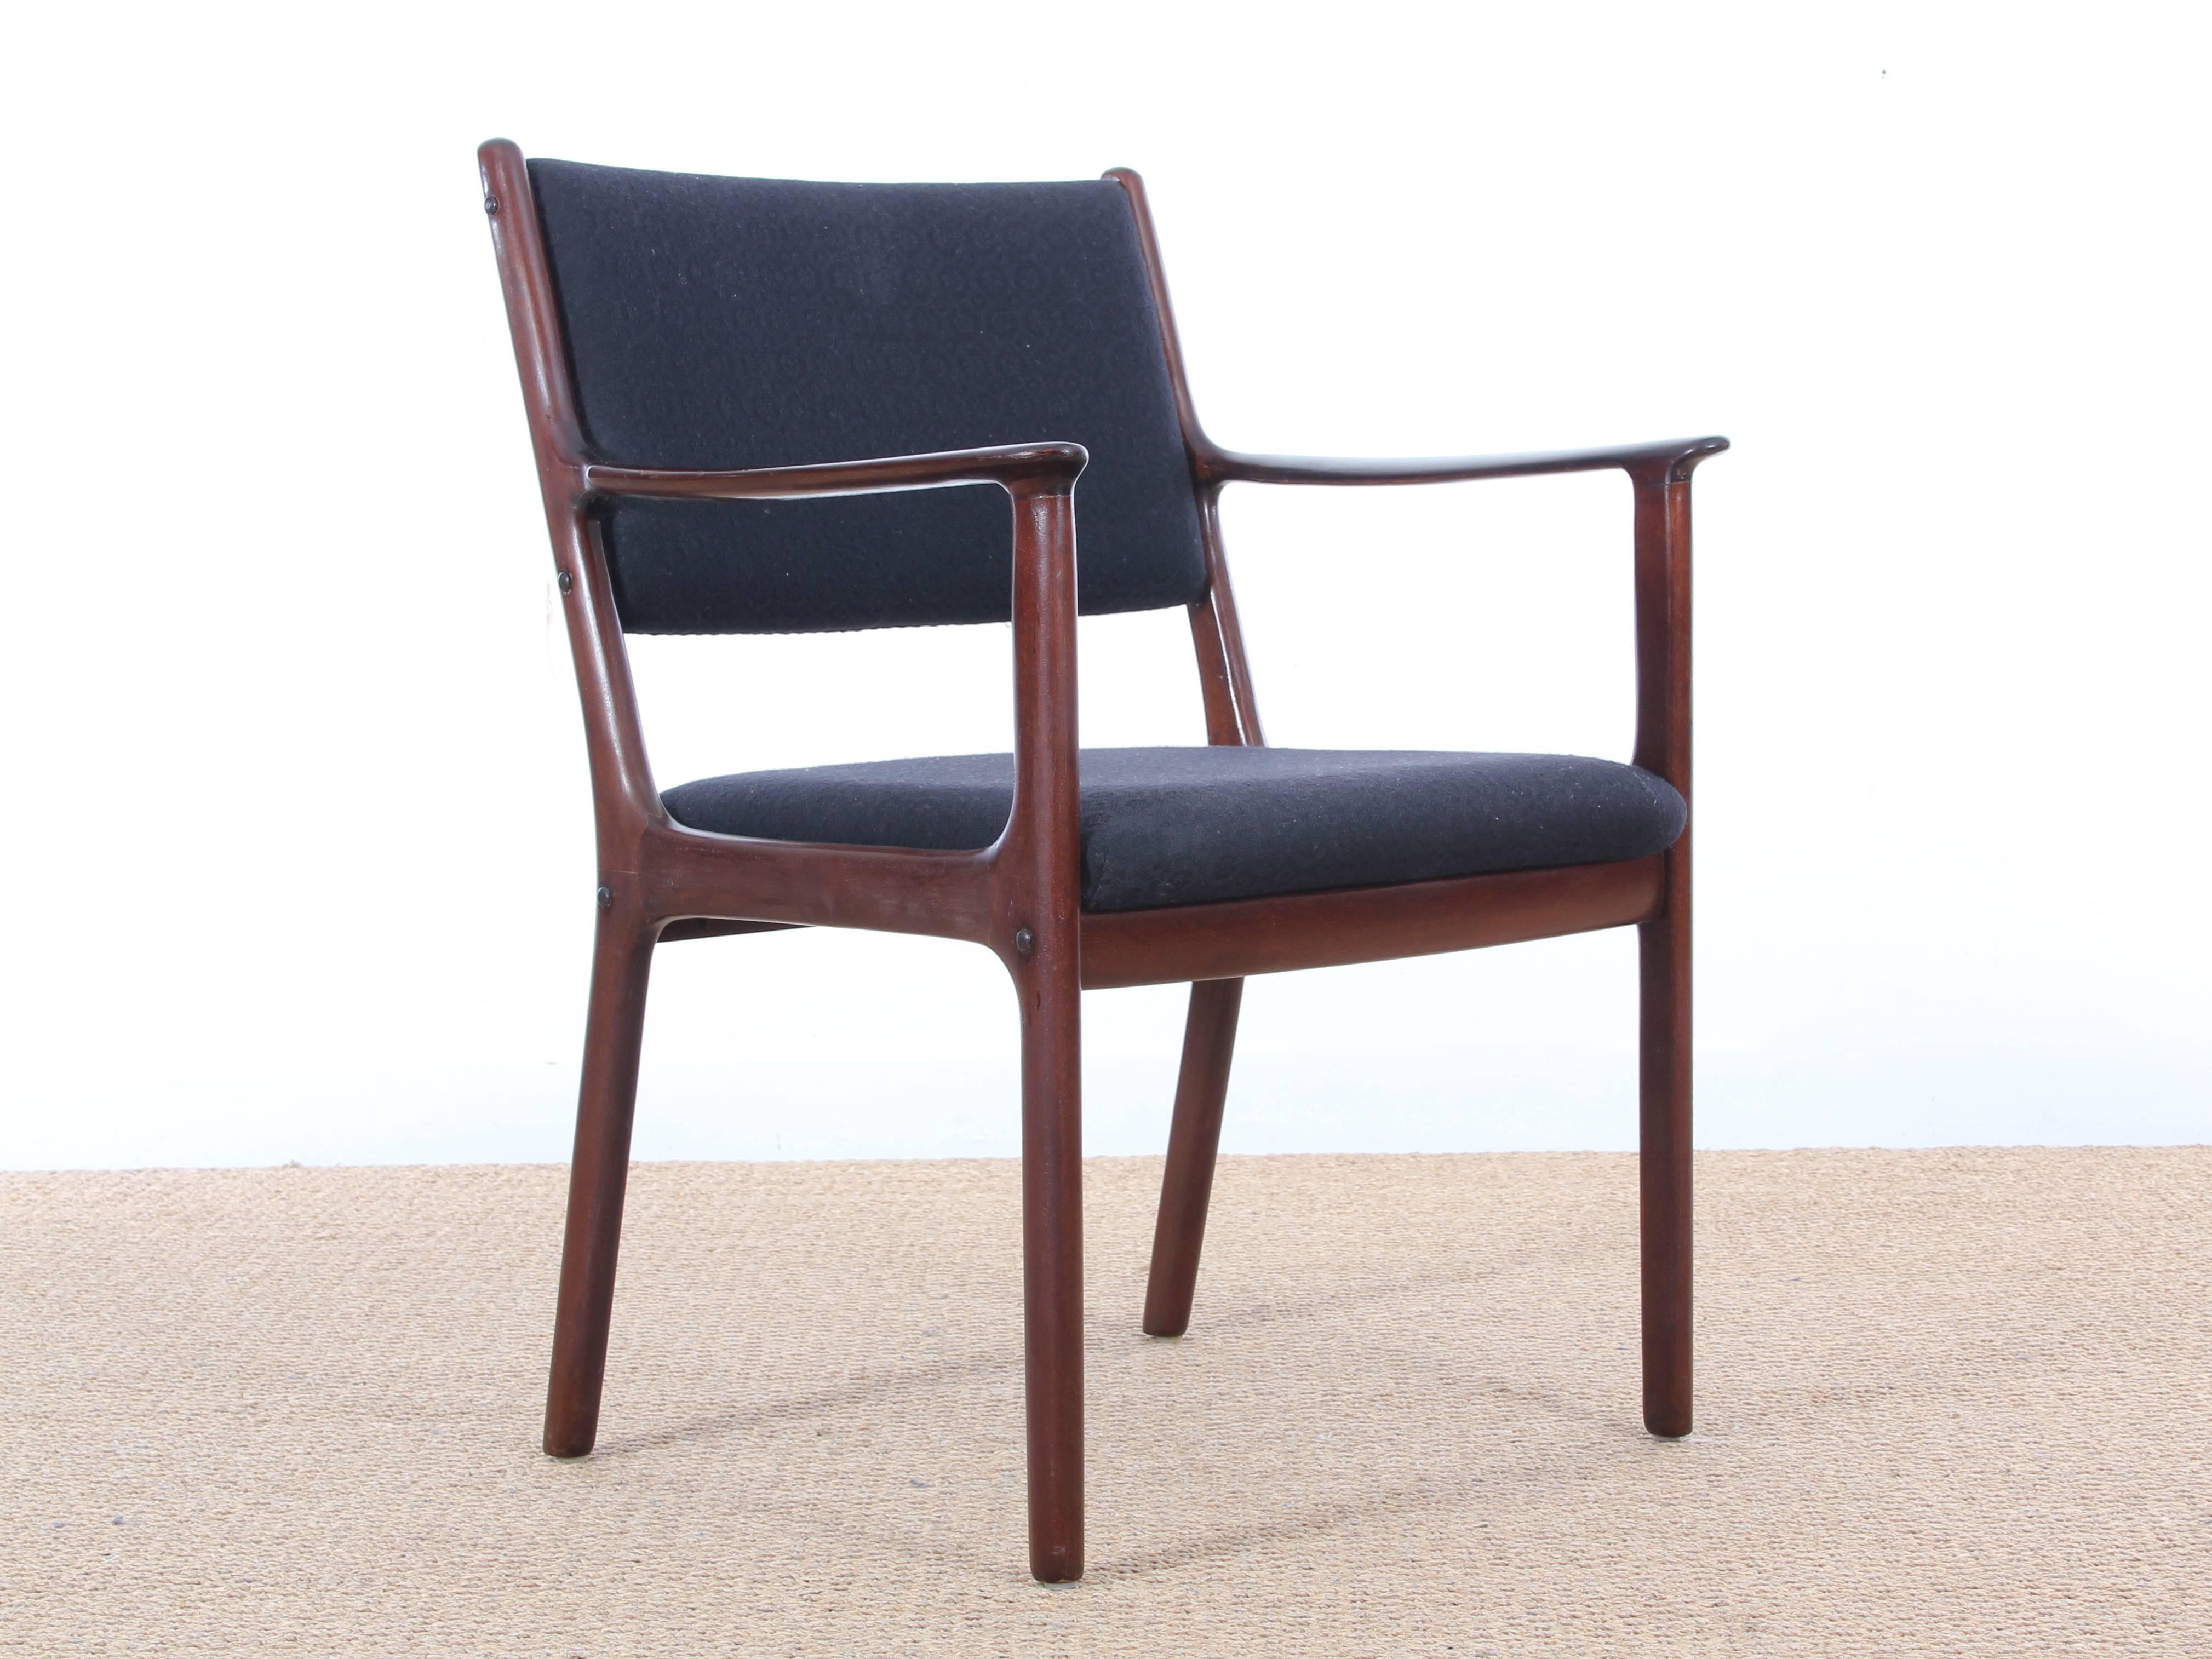 Danish Mid-Century Modern Pair of Armchairs in Mahogany Model PJ-412 by Ole Wanscher